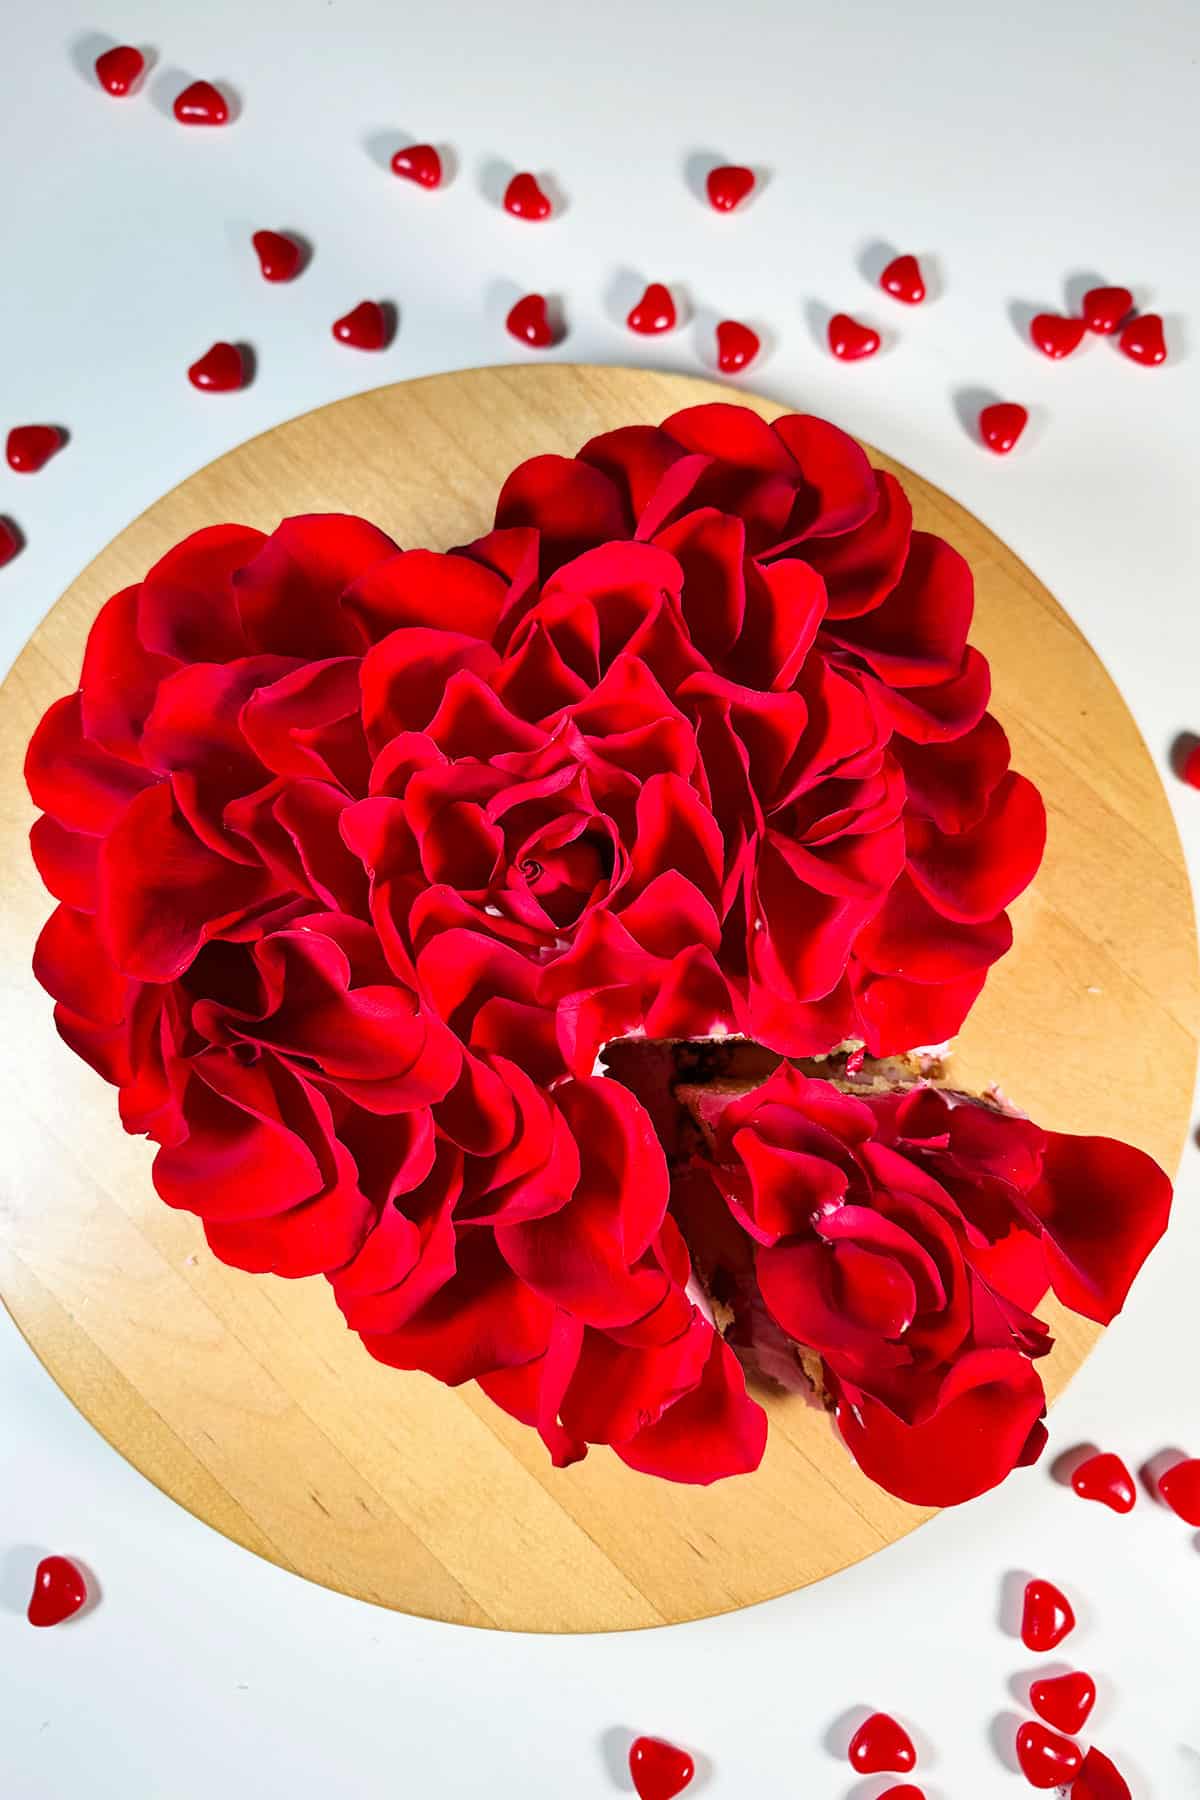 Easy Red Rose Cake With Fresh Flower Petals on Wood Cake Stand. 